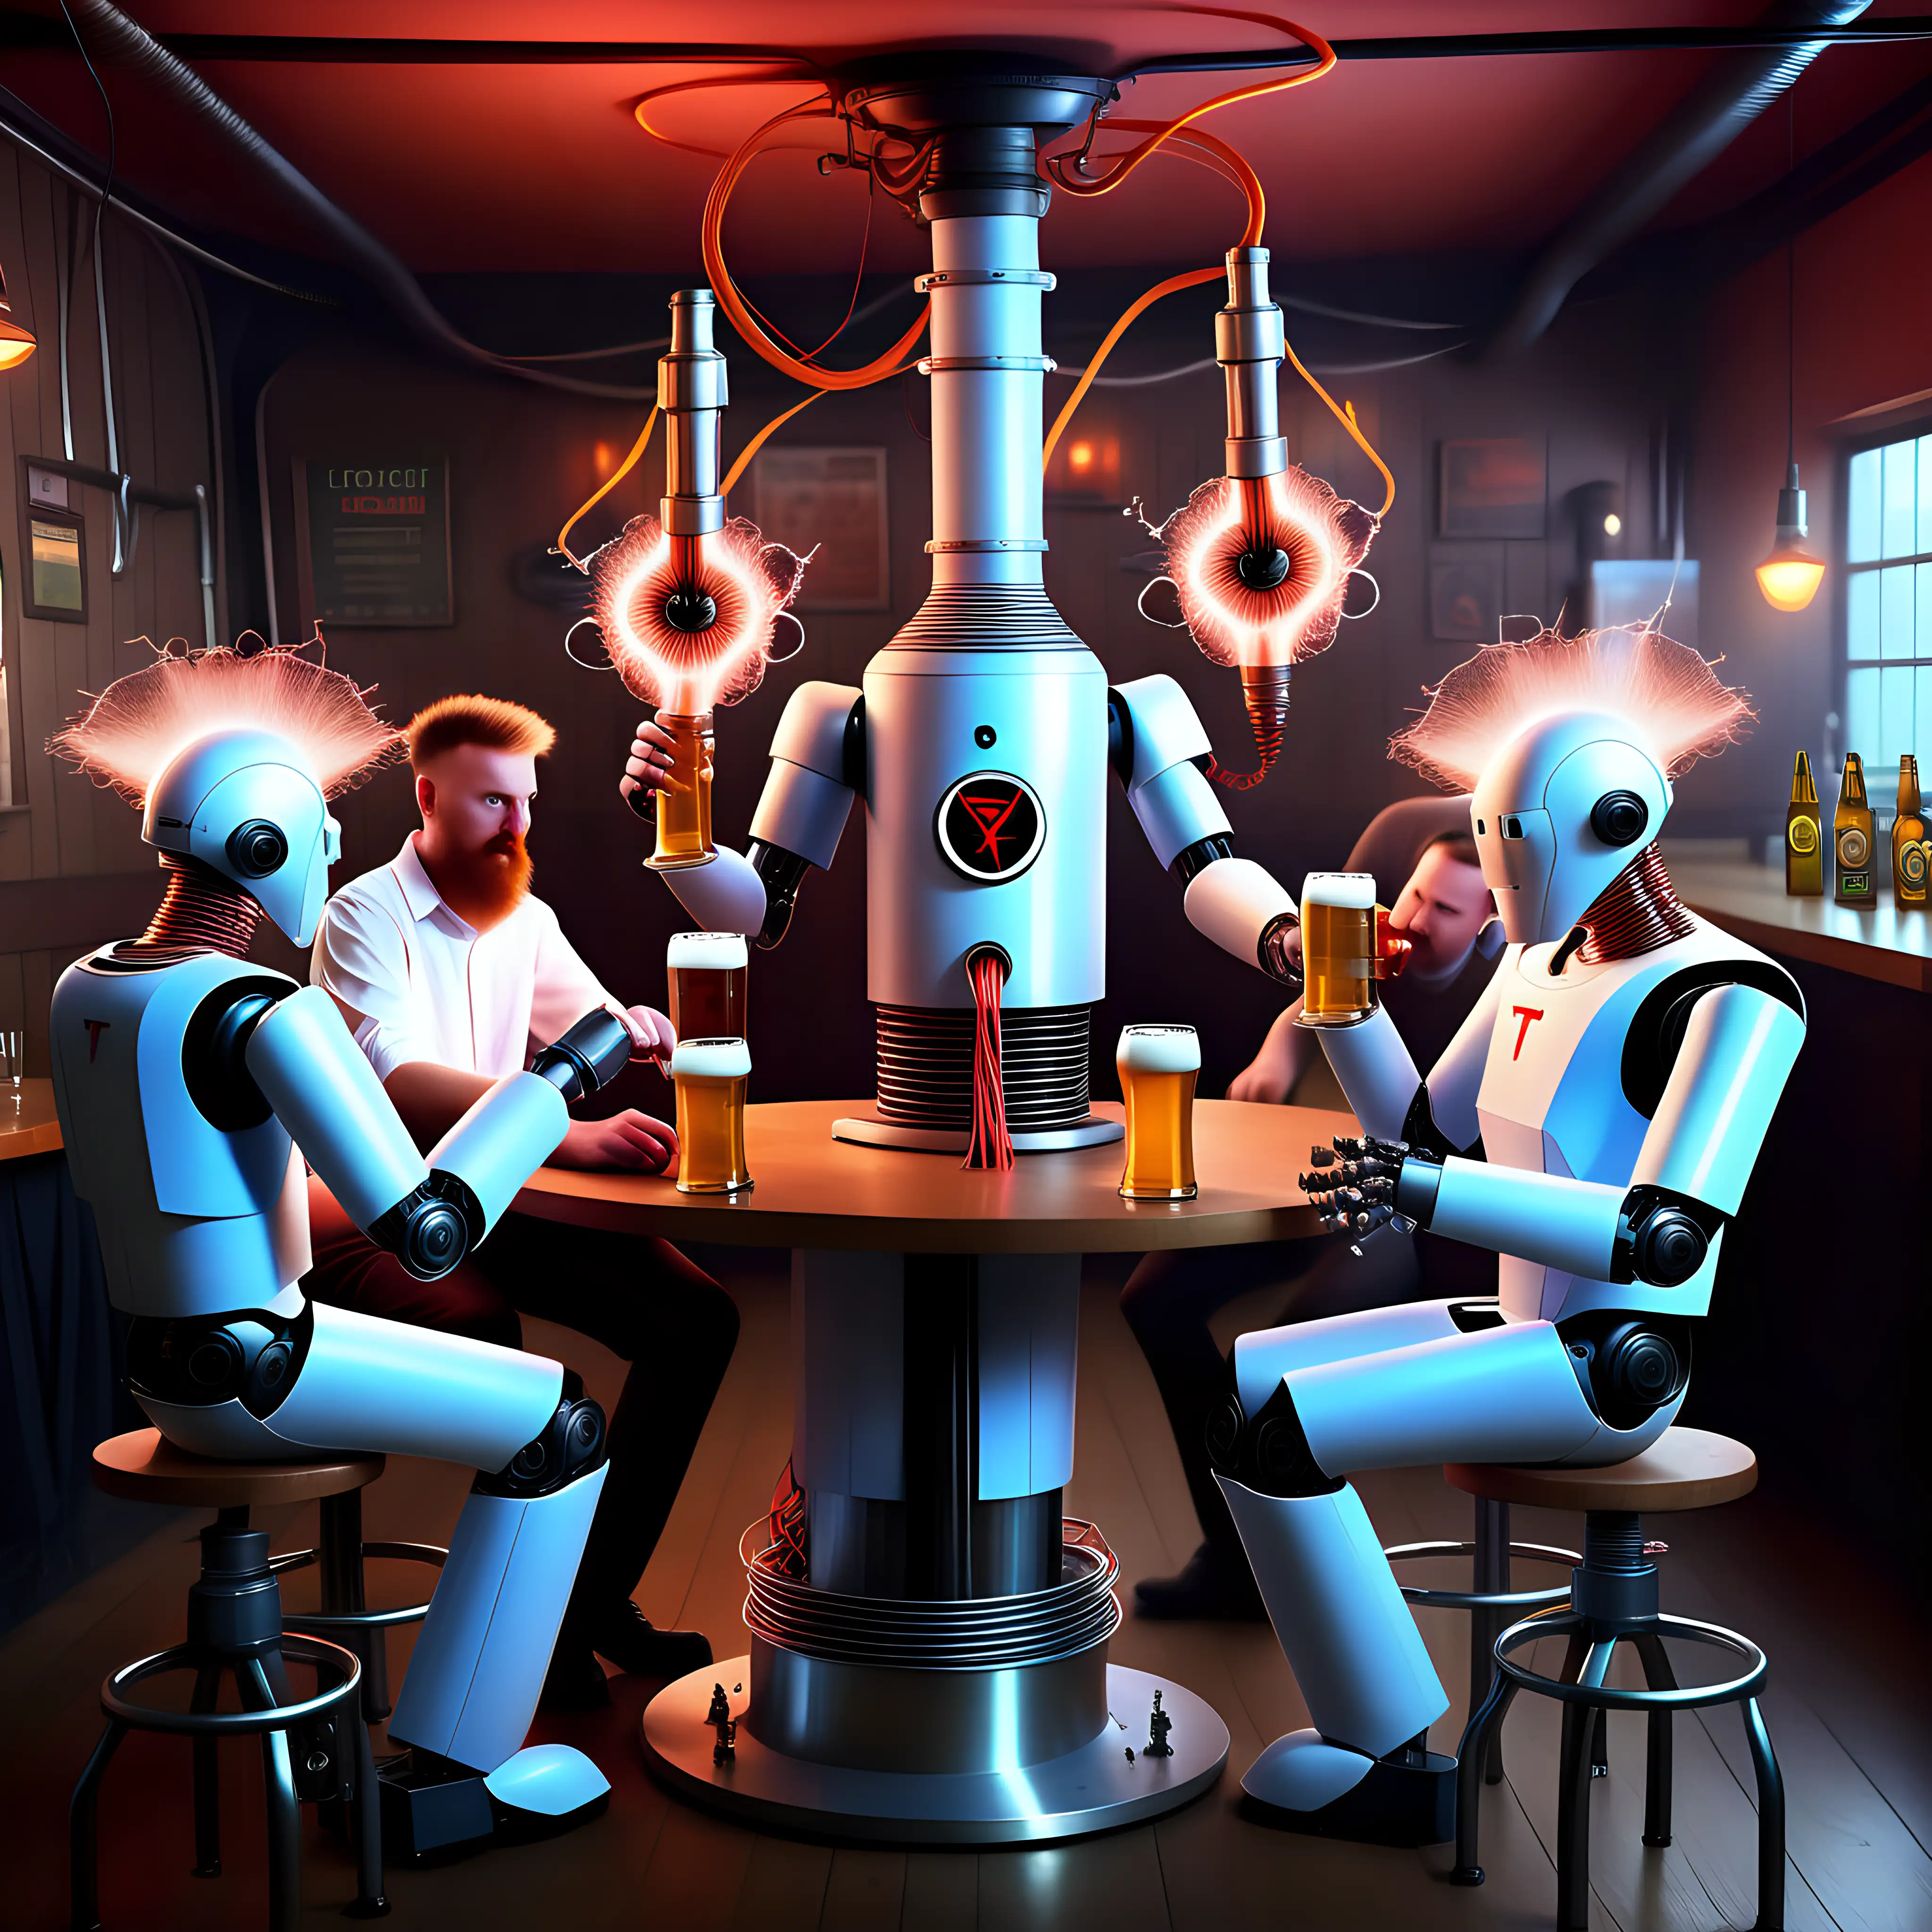 surrealistic image of a party of drunk electrical engineers in a pub with a tesla coil. An industrial robot serves the beer.